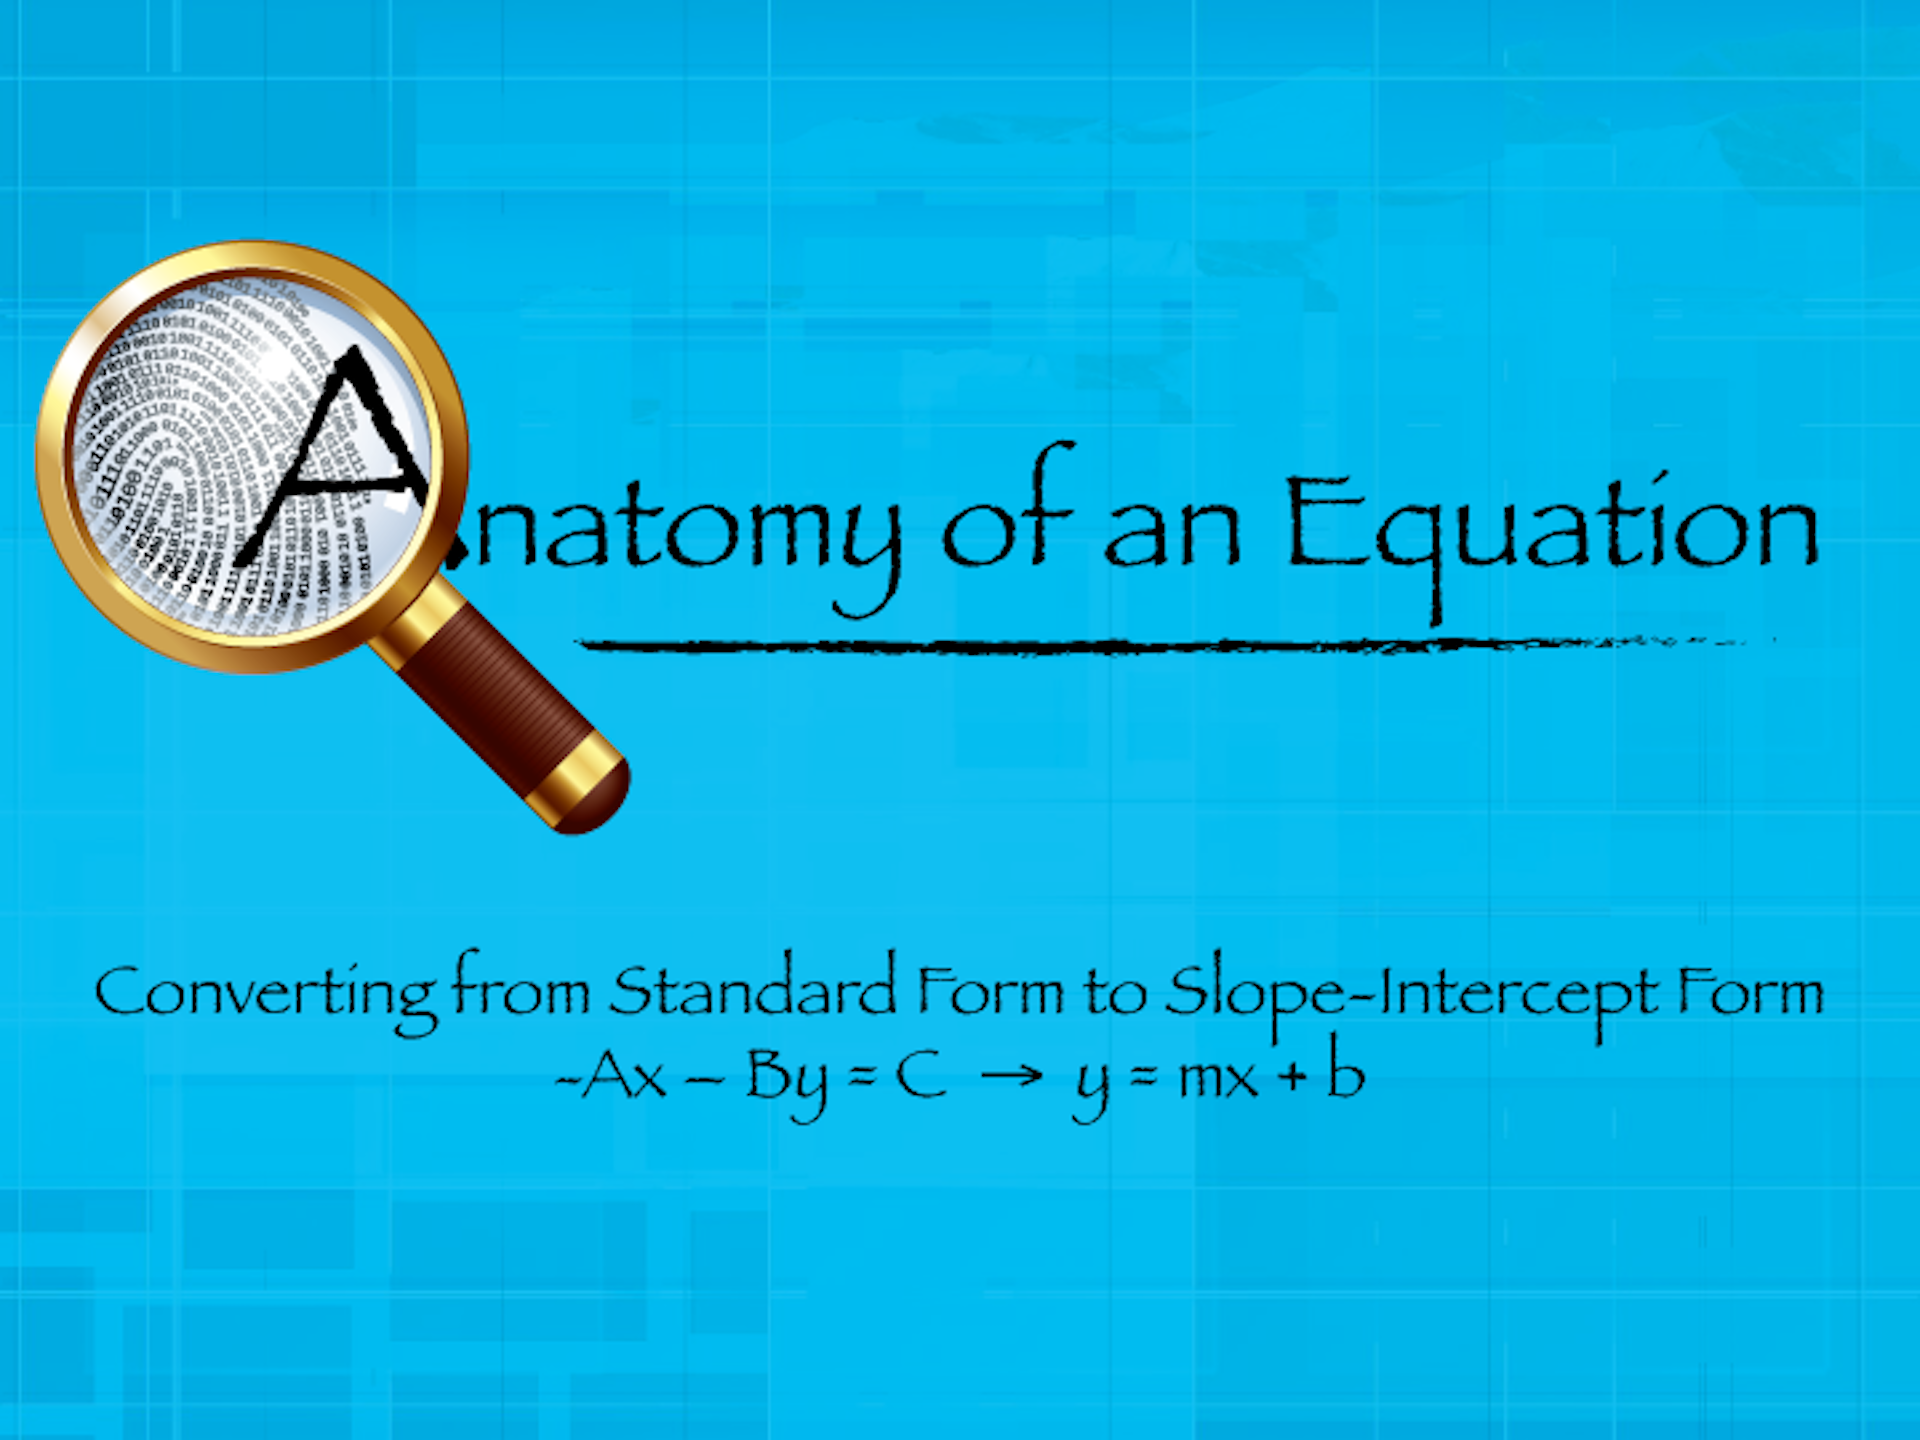 Closed Captioned Video: Anatomy of an Equation: Linear Equations in Standard Form to Slope-Intercept Form 7: -Ax - By = C